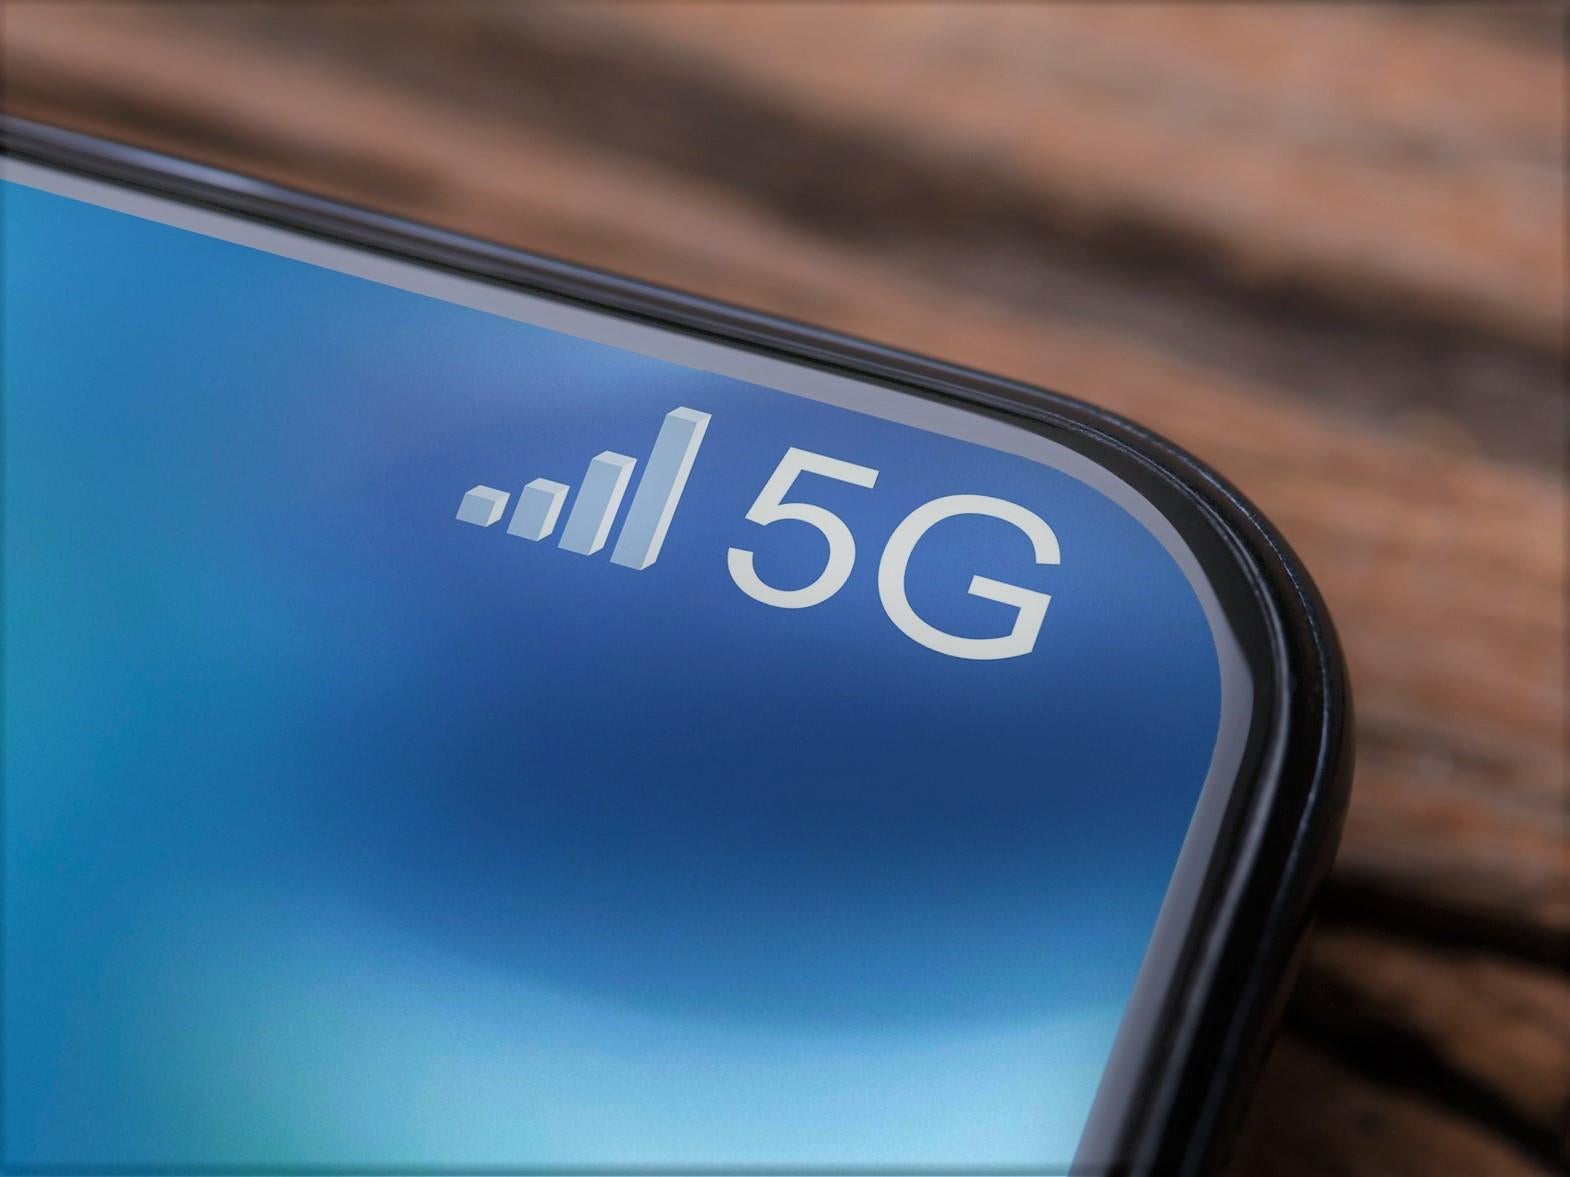 UK has slowest 5G speed and worst connectivity of 12 countries tested